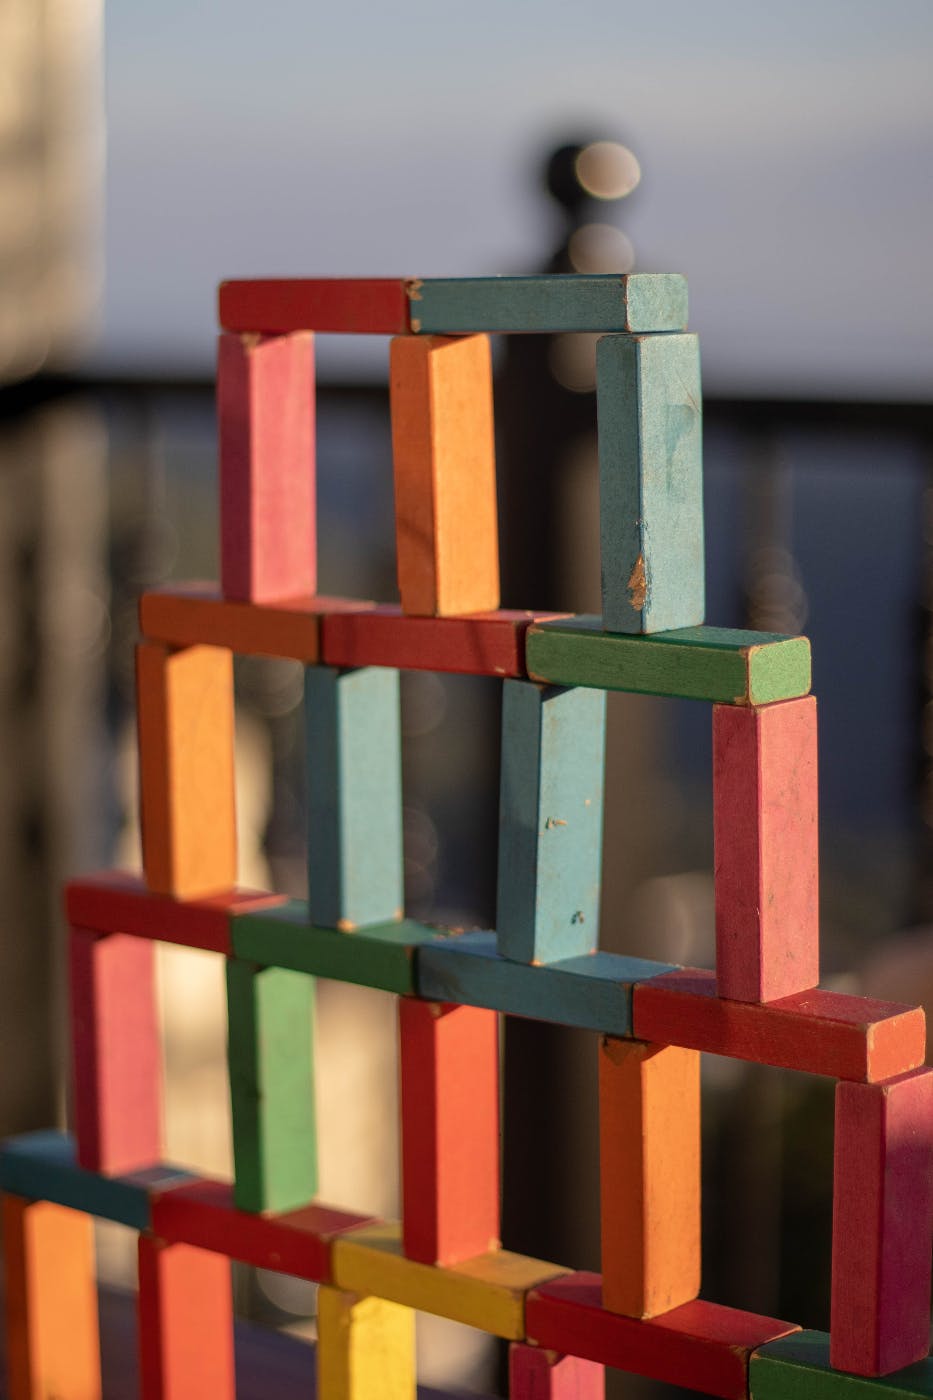 A table top structure made from many colored blocks